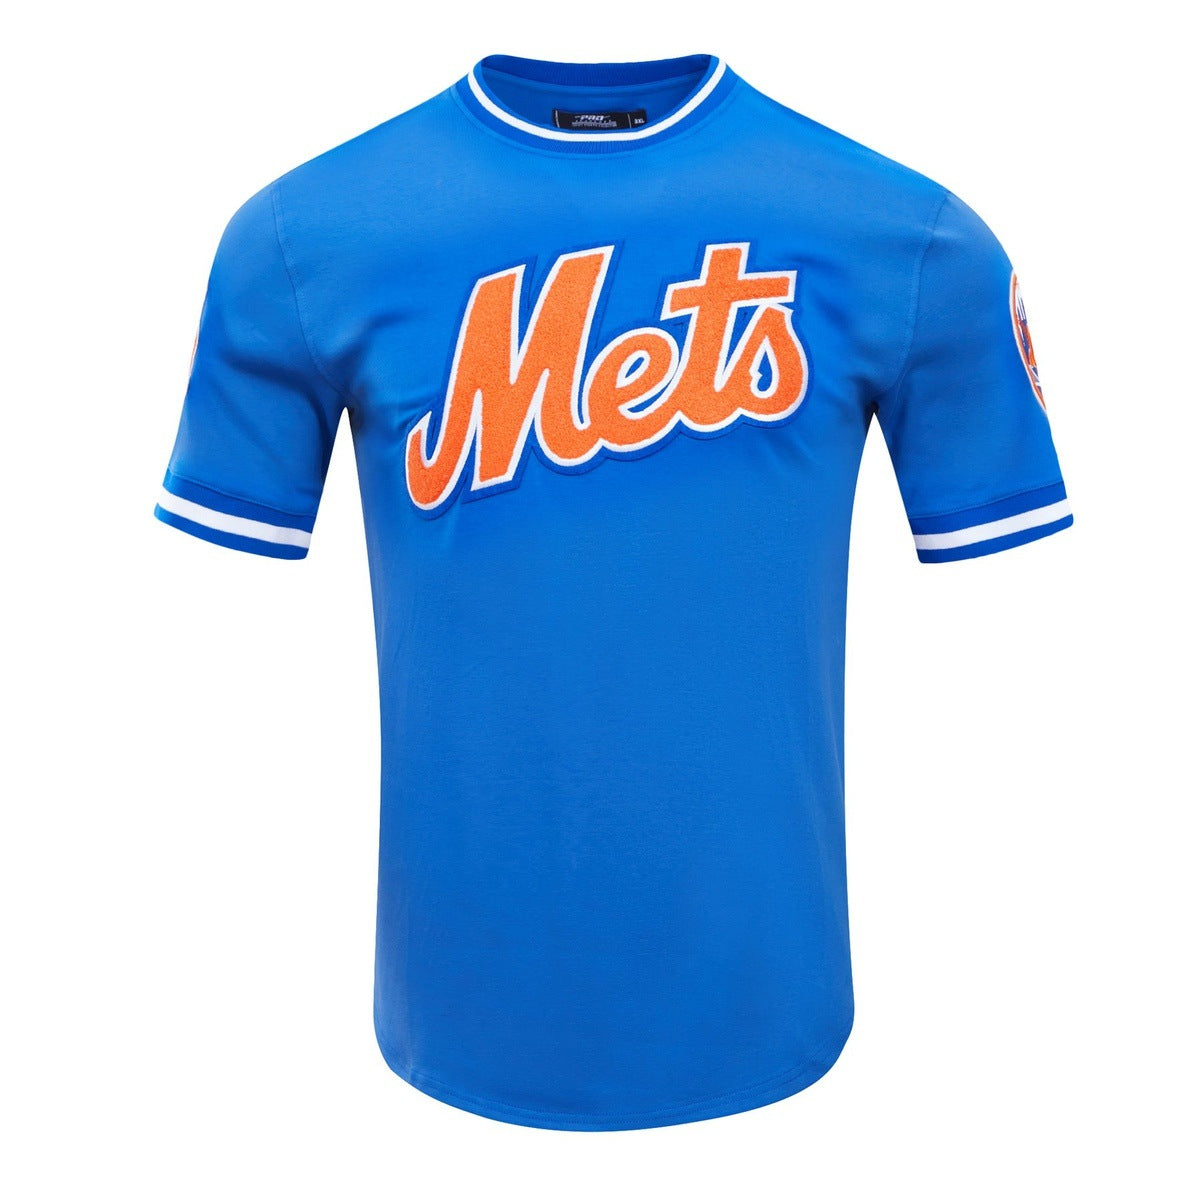 Love the new Mets jersey set. Classic blue and orange.